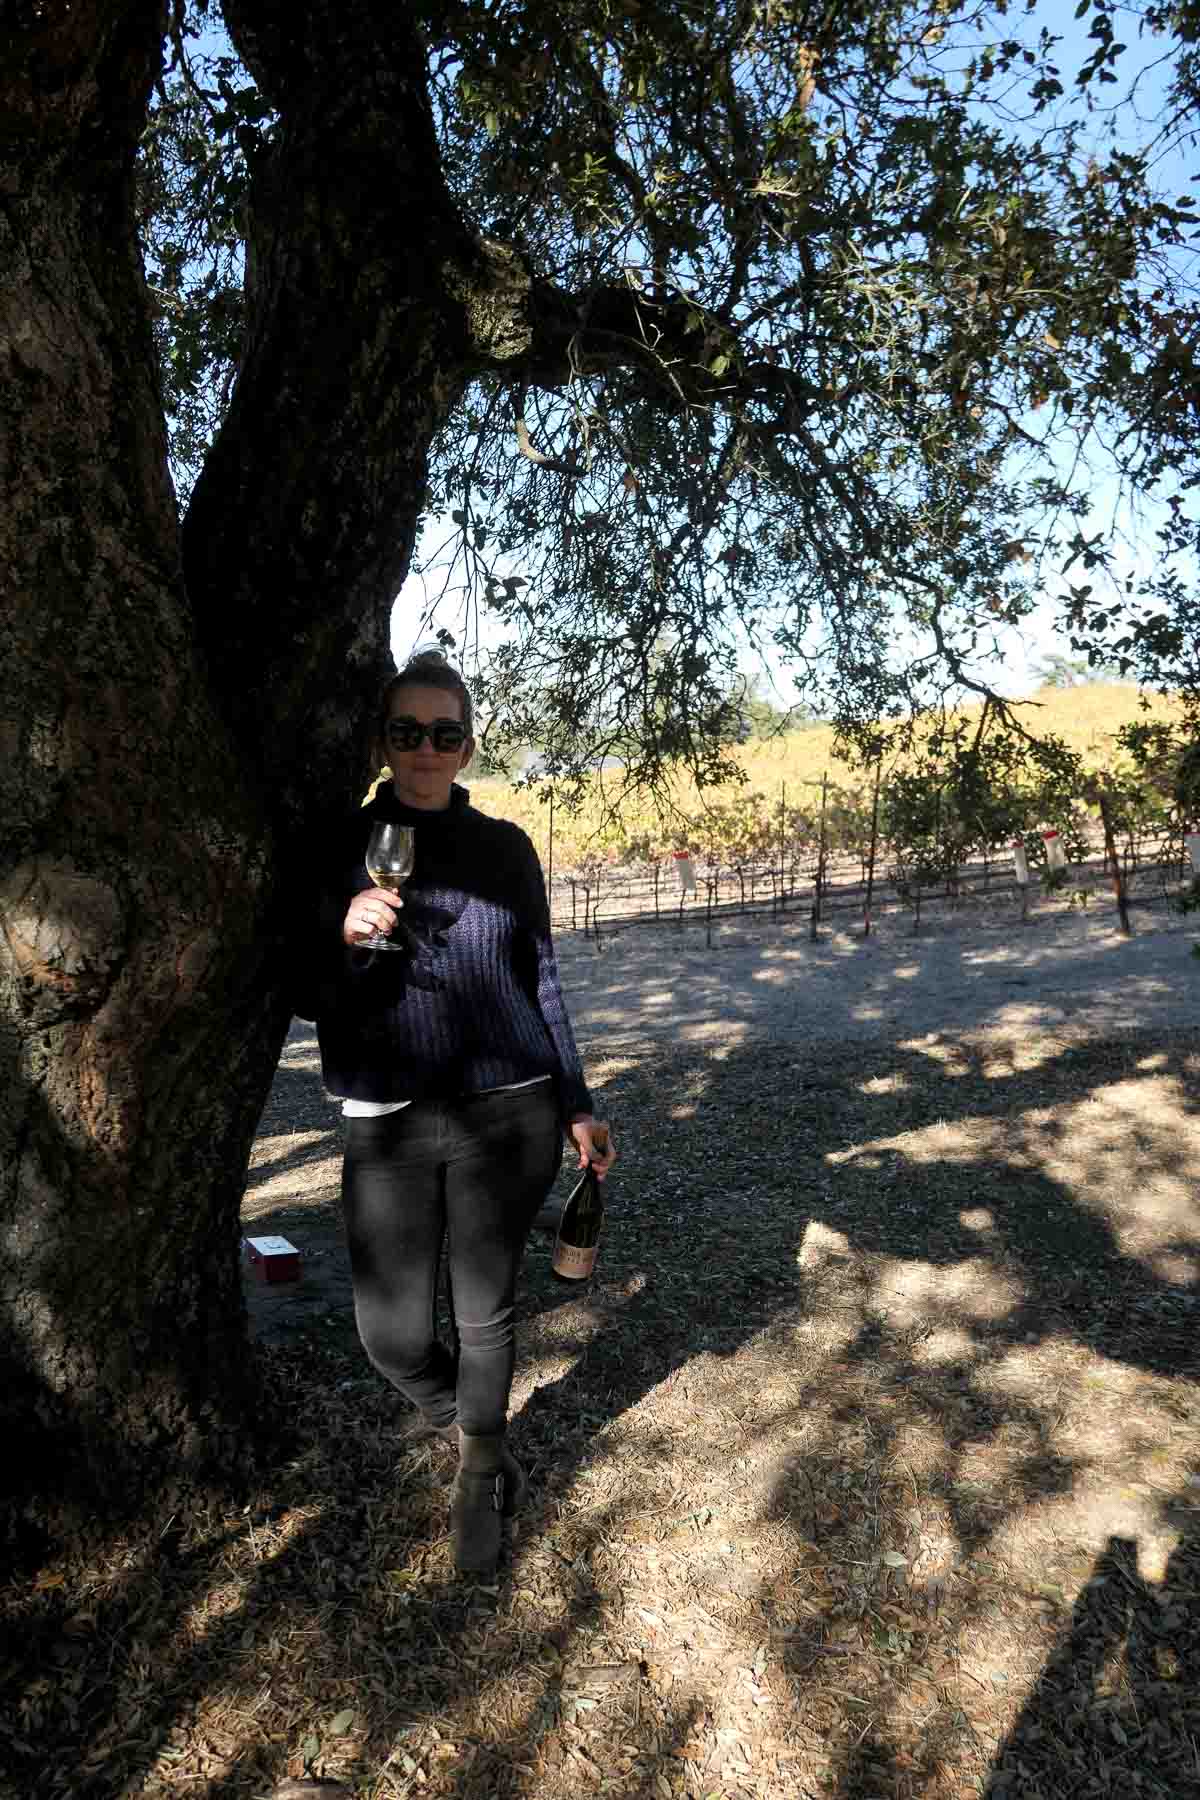 Luci leaning against tree at Belden Barns Winery